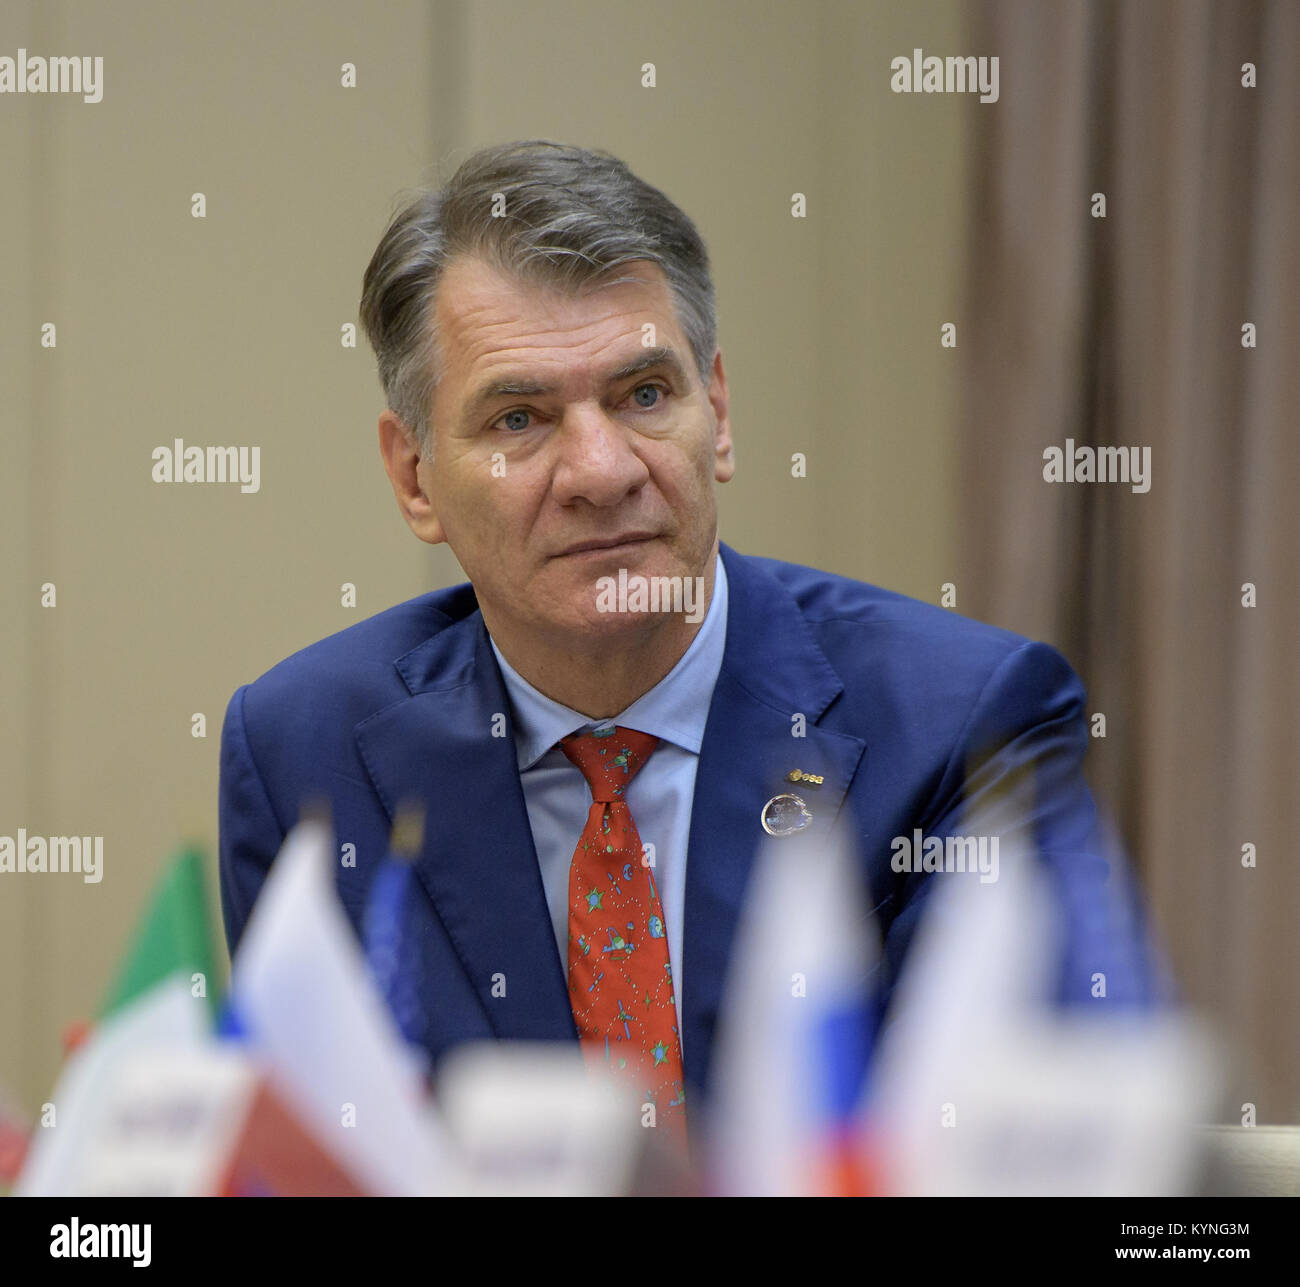 Expedition 52 flight engineer Paolo Nespoli of ESA is seen during a crew press conference at the Gagarin Cosmonaut Training Center (GCTC), Monday, July 10, 2017 in Star City, Russia.  Photo Credit: (NASA/Bill Ingalls) Stock Photo